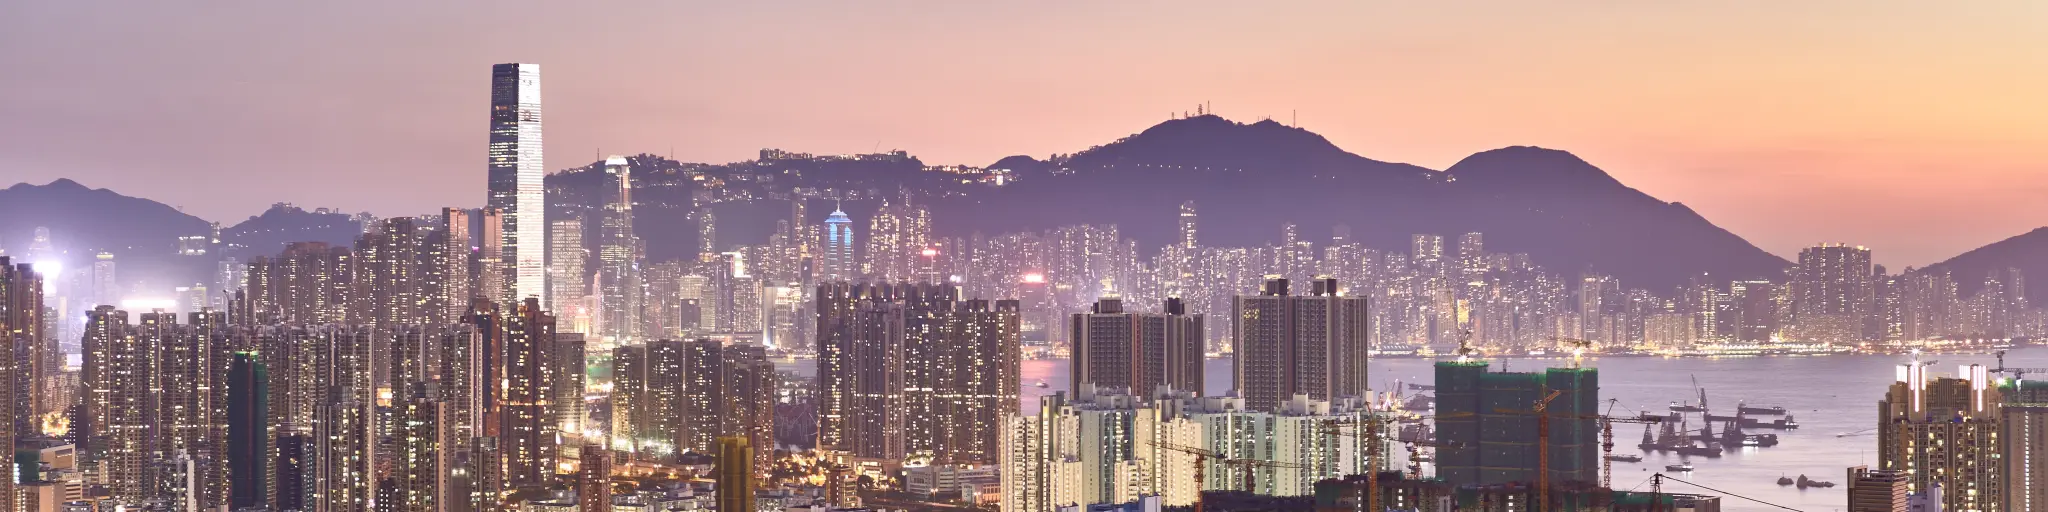 The Hong Kong skyline lit up amid a pink sunset with the harbour in the middle and mountains in the background